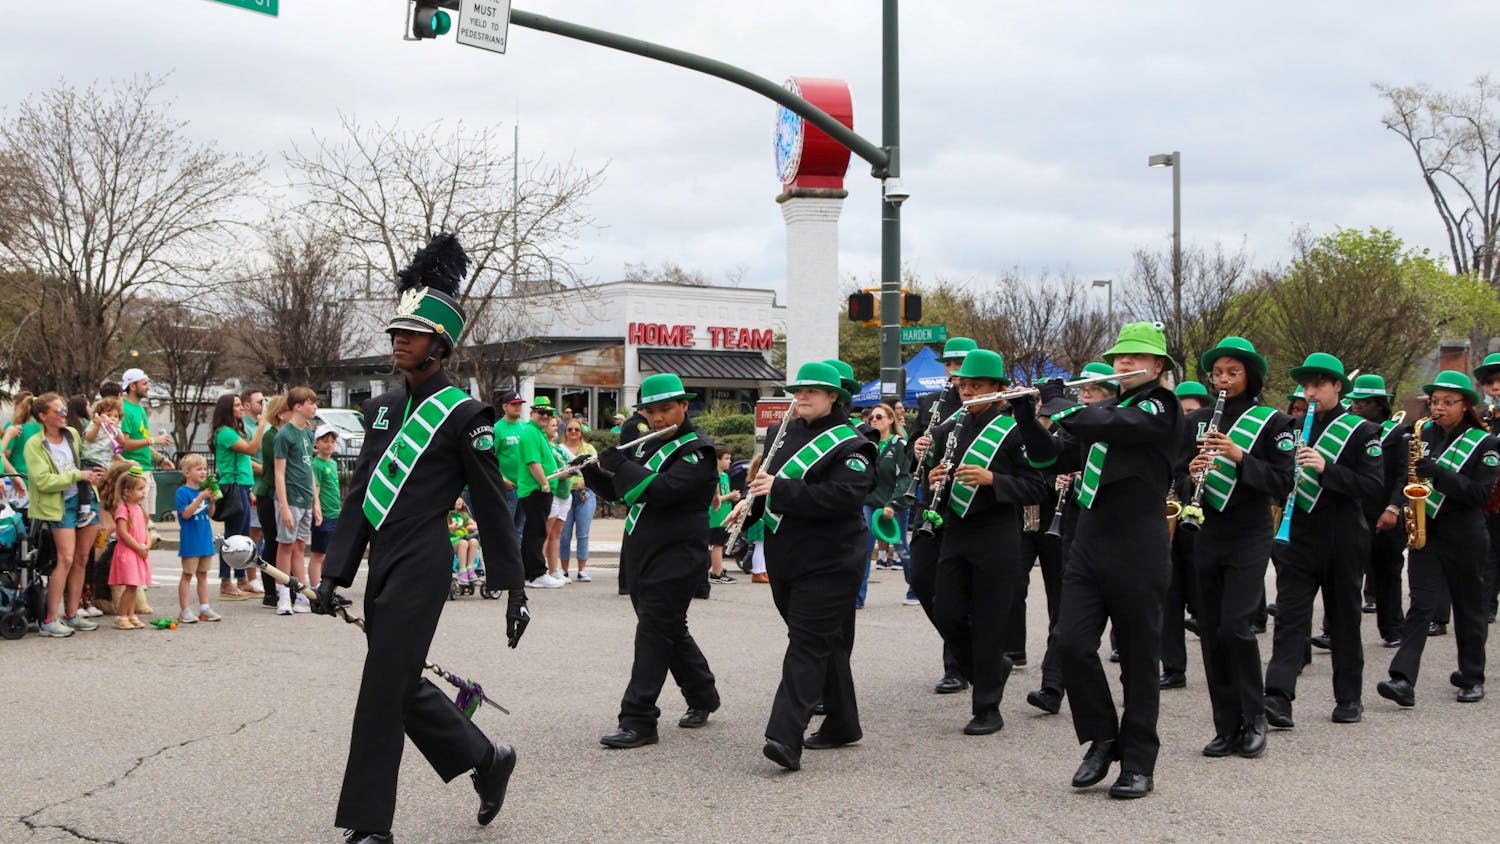 The Lakewood High School marching band walks in the 40th Annual St. Pats in 5 Points Parade. The local high school provided band members for the festival parade to march along floats, dancers, and other performers. 